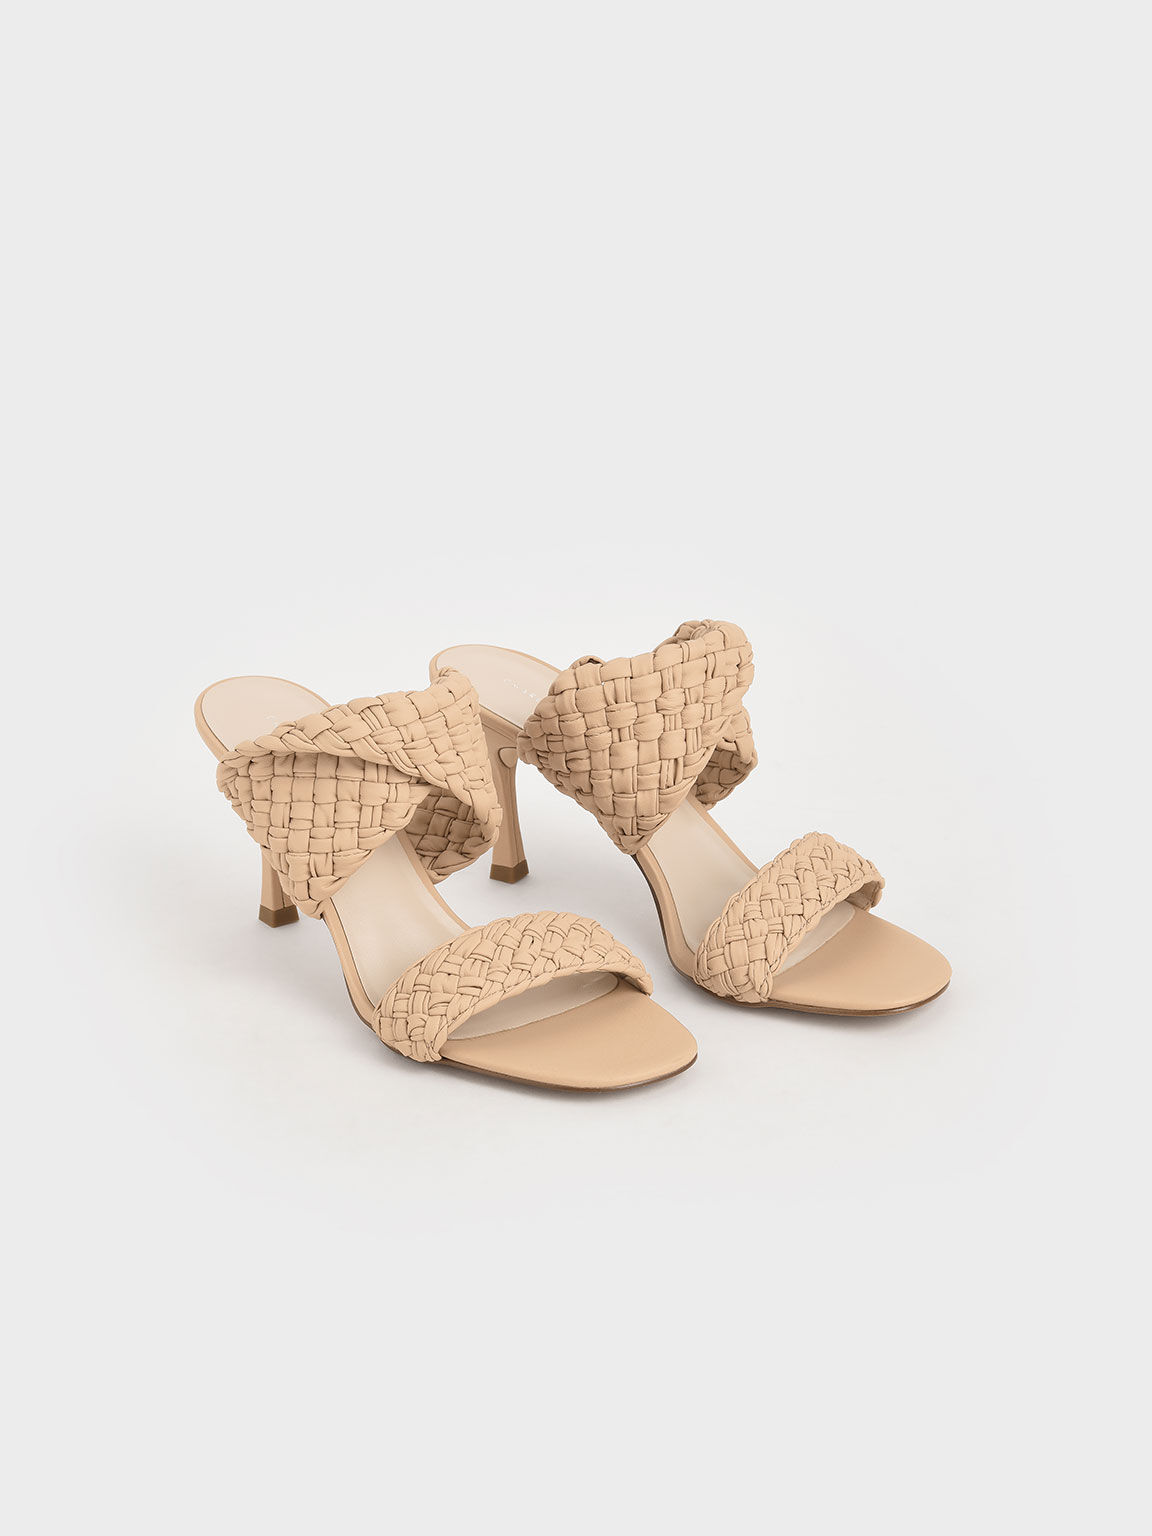 Sepatu Heeled Mules Double Strap Woven, Nude, hi-res